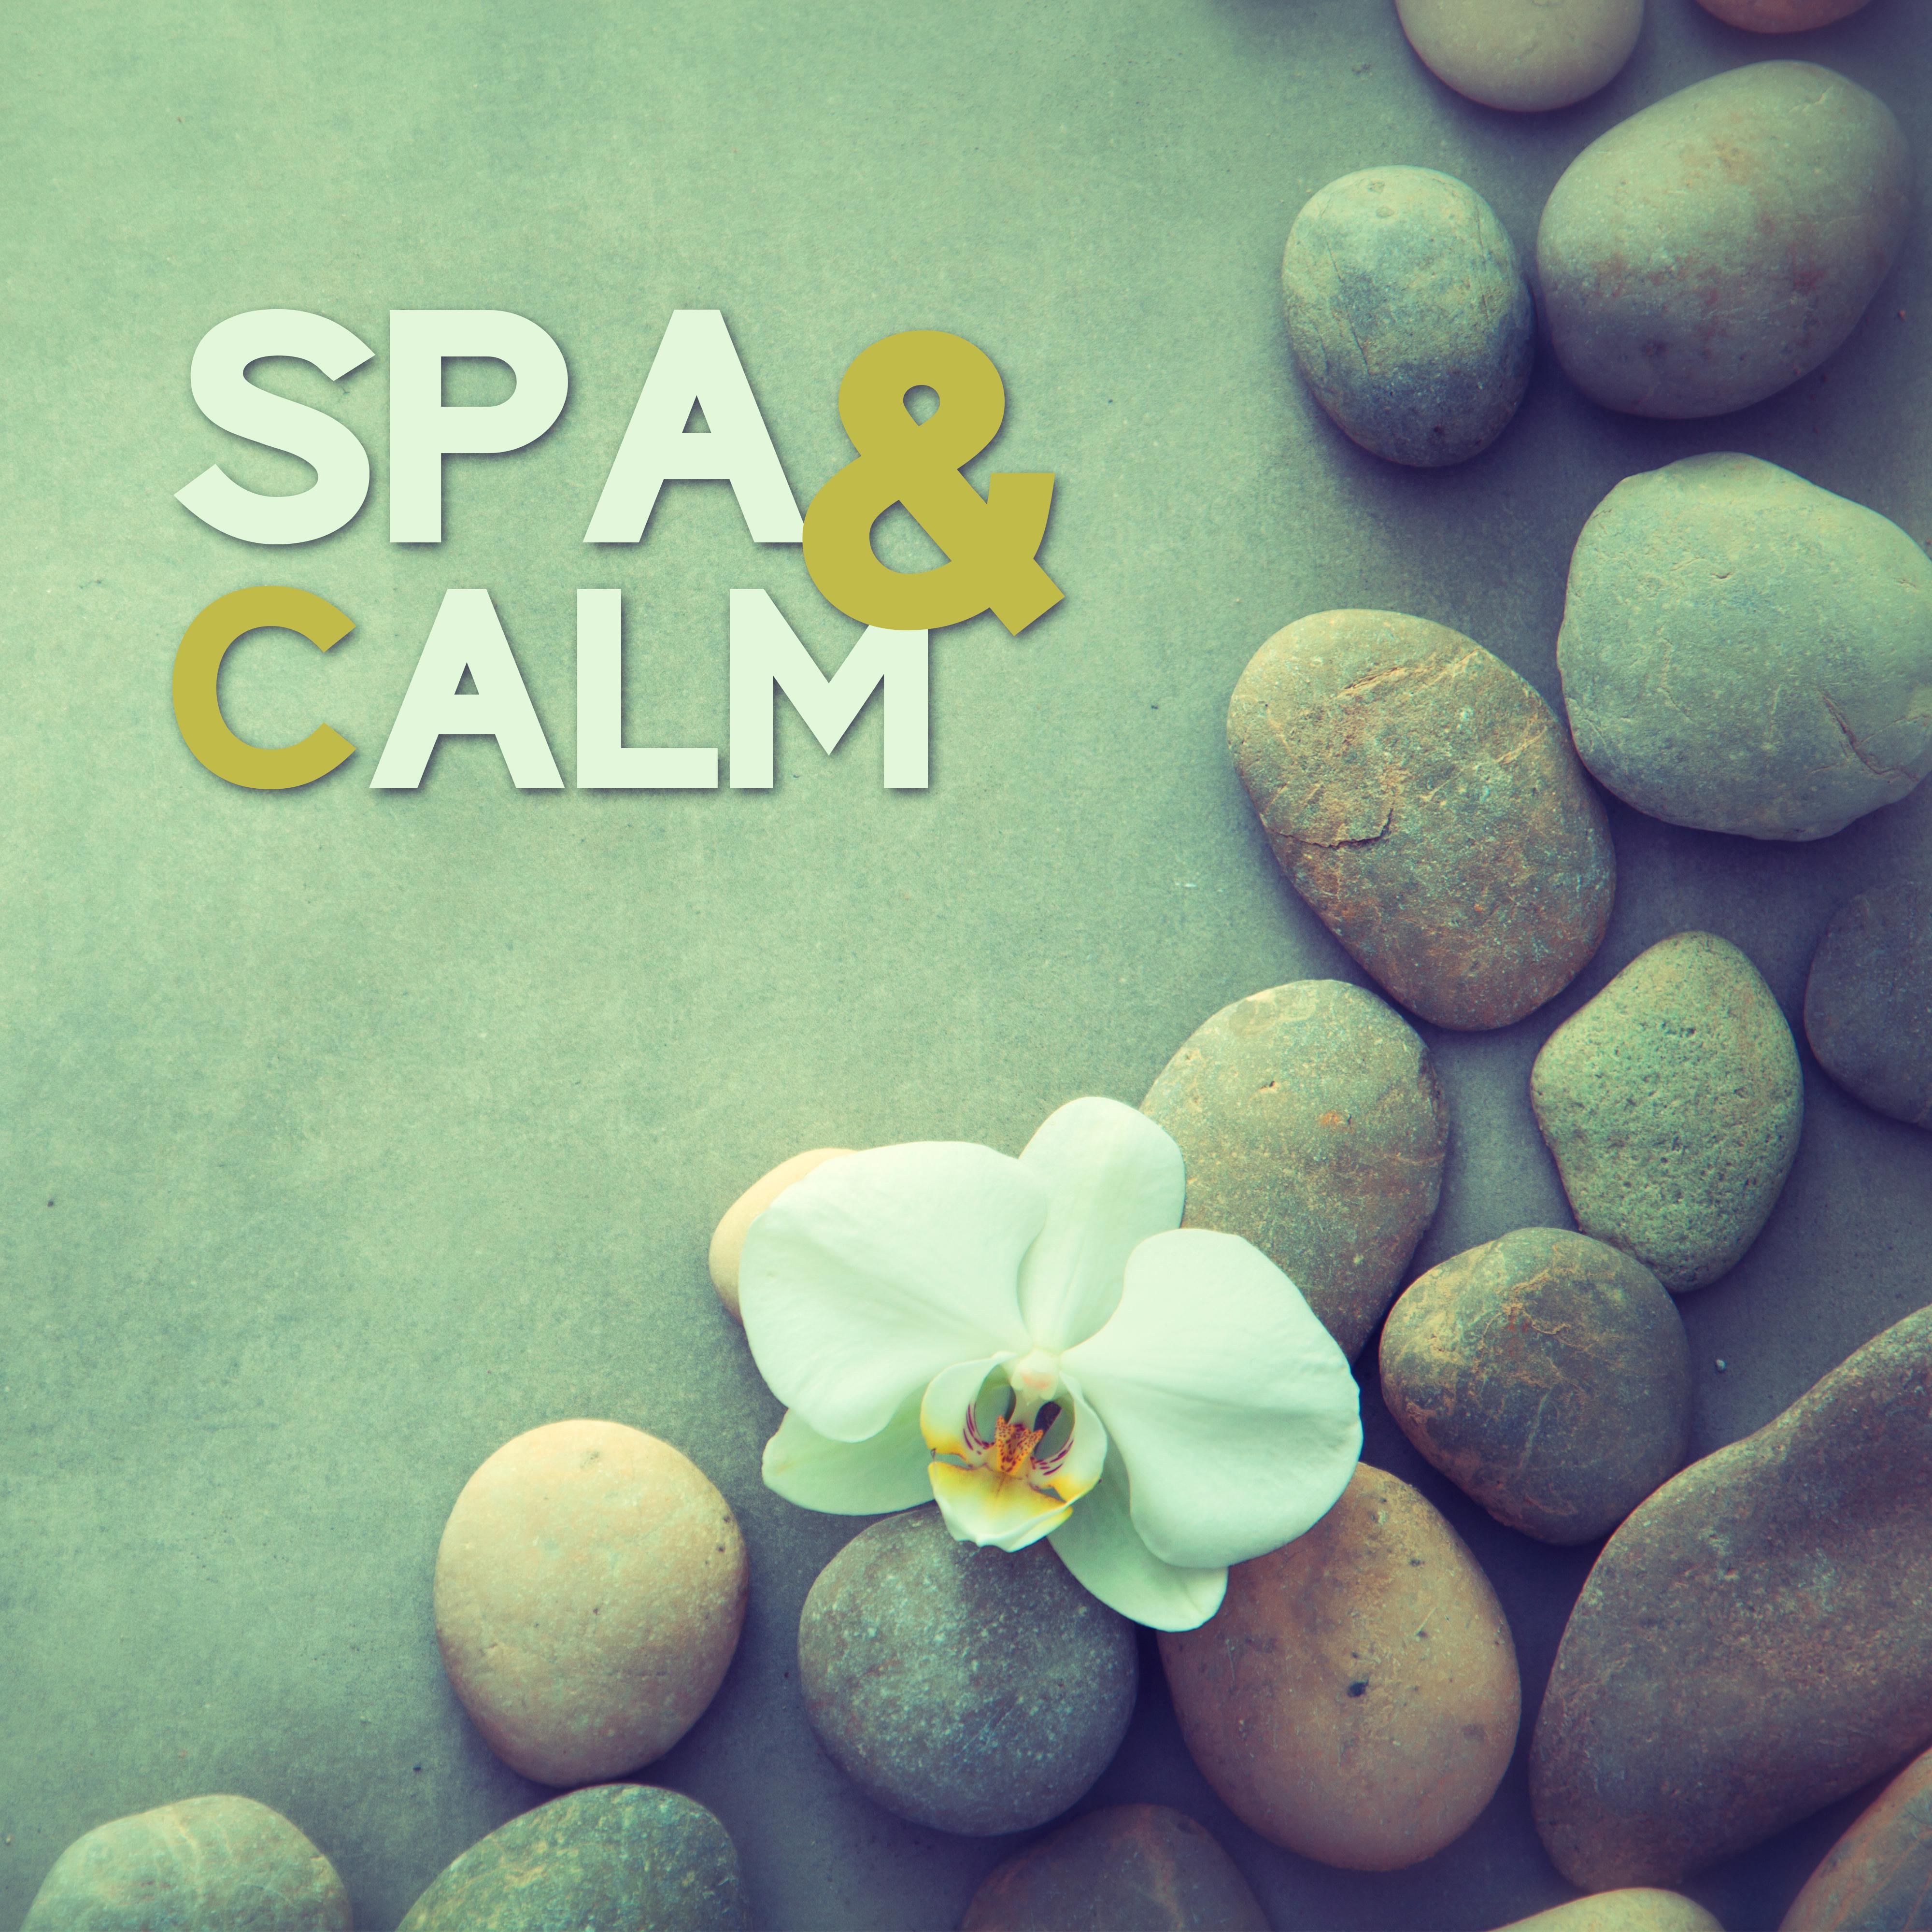 Spa & Calm – Soothing Massage Music for Reduce Stress, Zen, Relaxing Music, Deep Harmony, Calming Sounds, Bath Music, Spa Chillout Mix